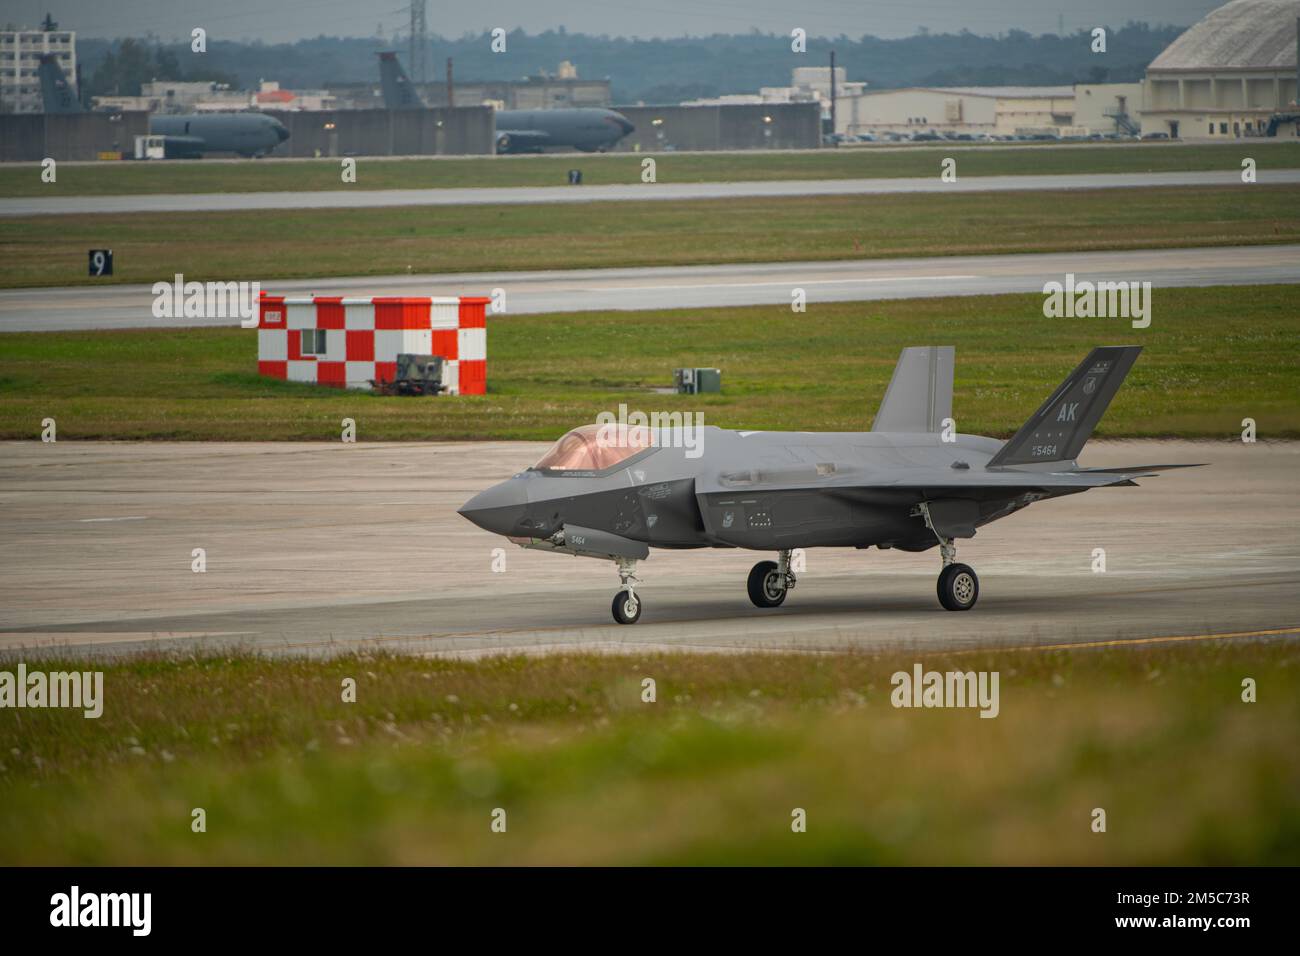 A U.S. Air Force F-35A Lightning II from Eielson Air Force Base, Alaska, taxis at Kadena Air Base, Japan, before take-off in support of integrated air operations, Feb. 21, 2022. Kadena Air Base regularly hosts transient aircraft in order to ensure a free and open Indo-Pacific region and to uphold obligations under the Treaty of Mutual Security and Cooperation between the United States and Japan. Stock Photo